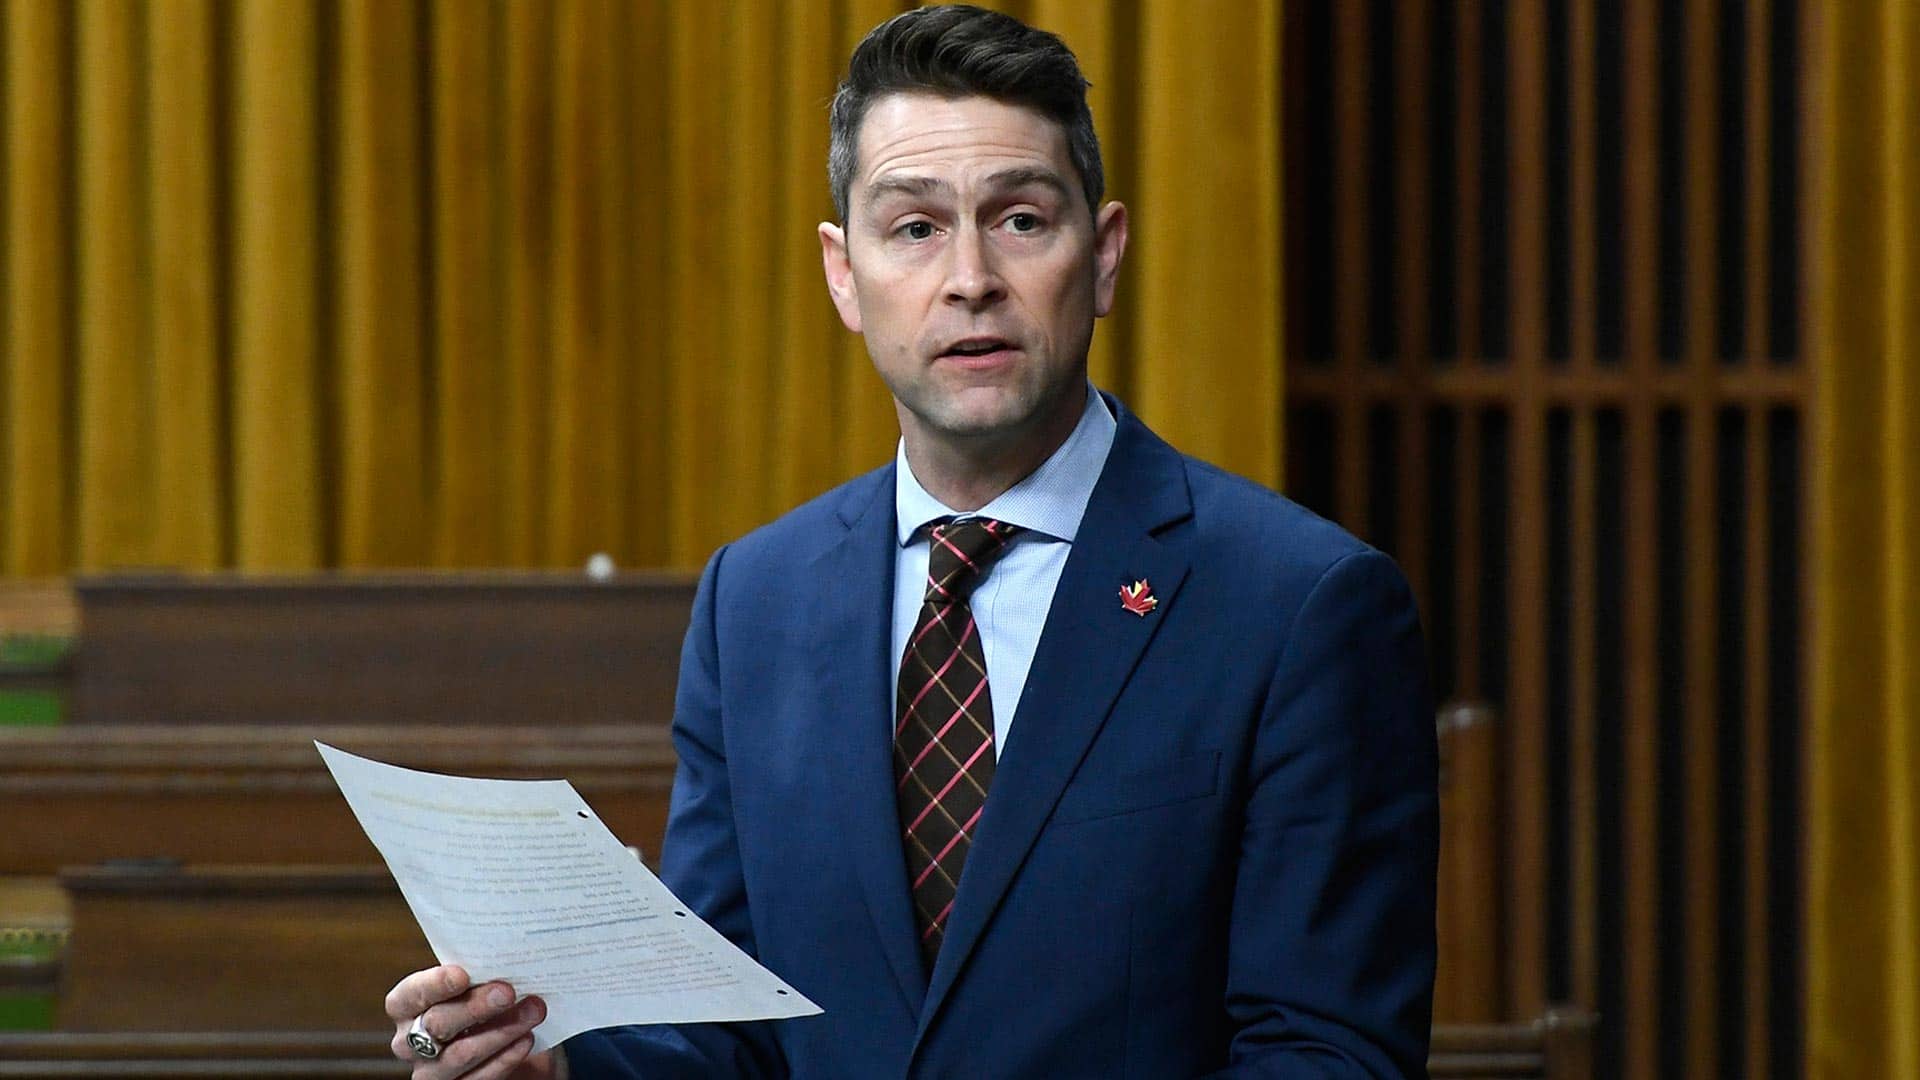 Canadian MP Caught Naked On Video During Virtual Meeting